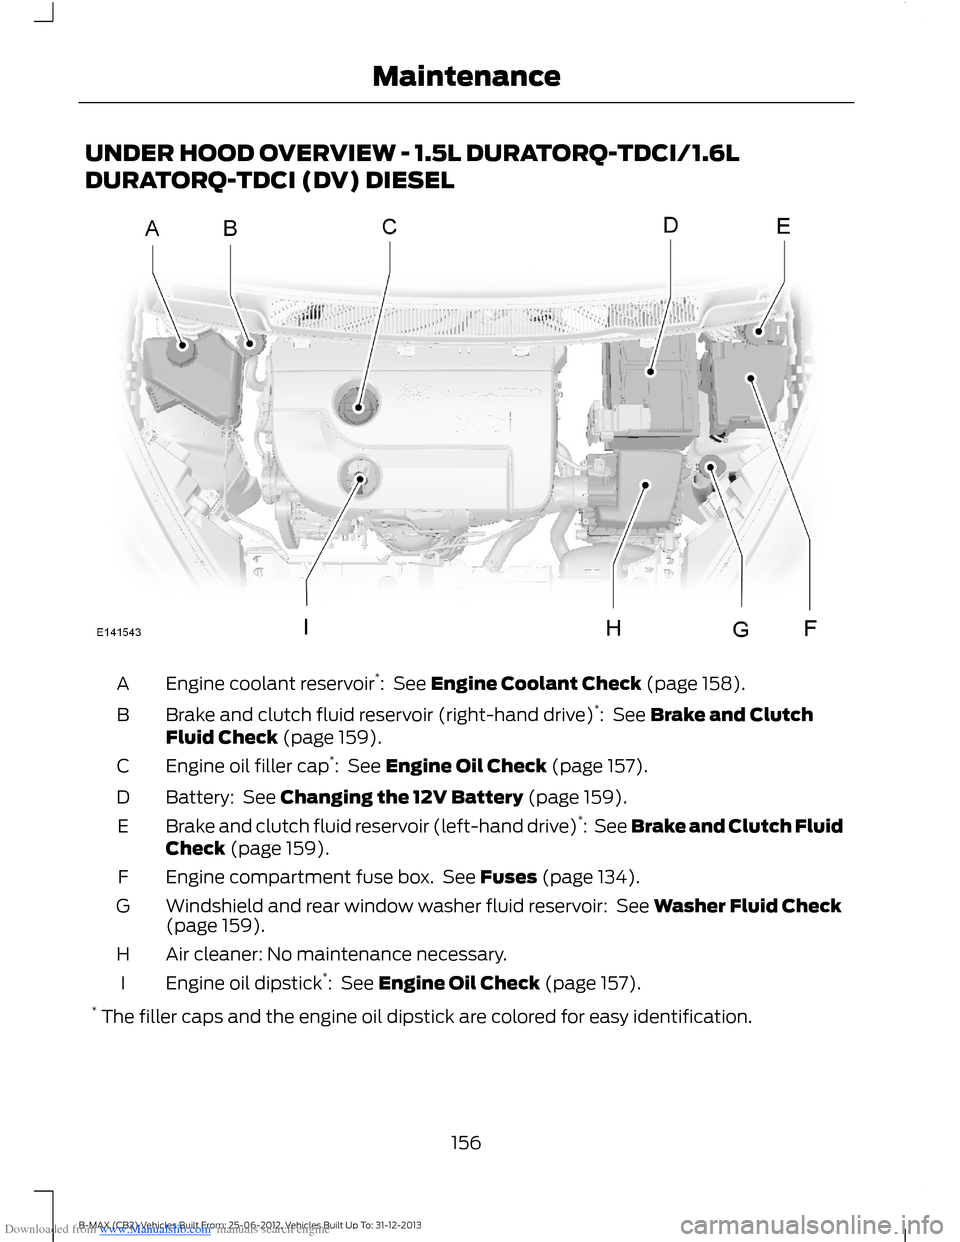 FORD B MAX 2013 1.G Owners Manual Downloaded from www.Manualslib.com manuals search engine UNDER HOOD OVERVIEW - 1.5L DURATORQ-TDCI/1.6L
DURATORQ-TDCI (DV) DIESEL
Engine coolant reservoir*:  See Engine Coolant Check (page 158).A
Brake